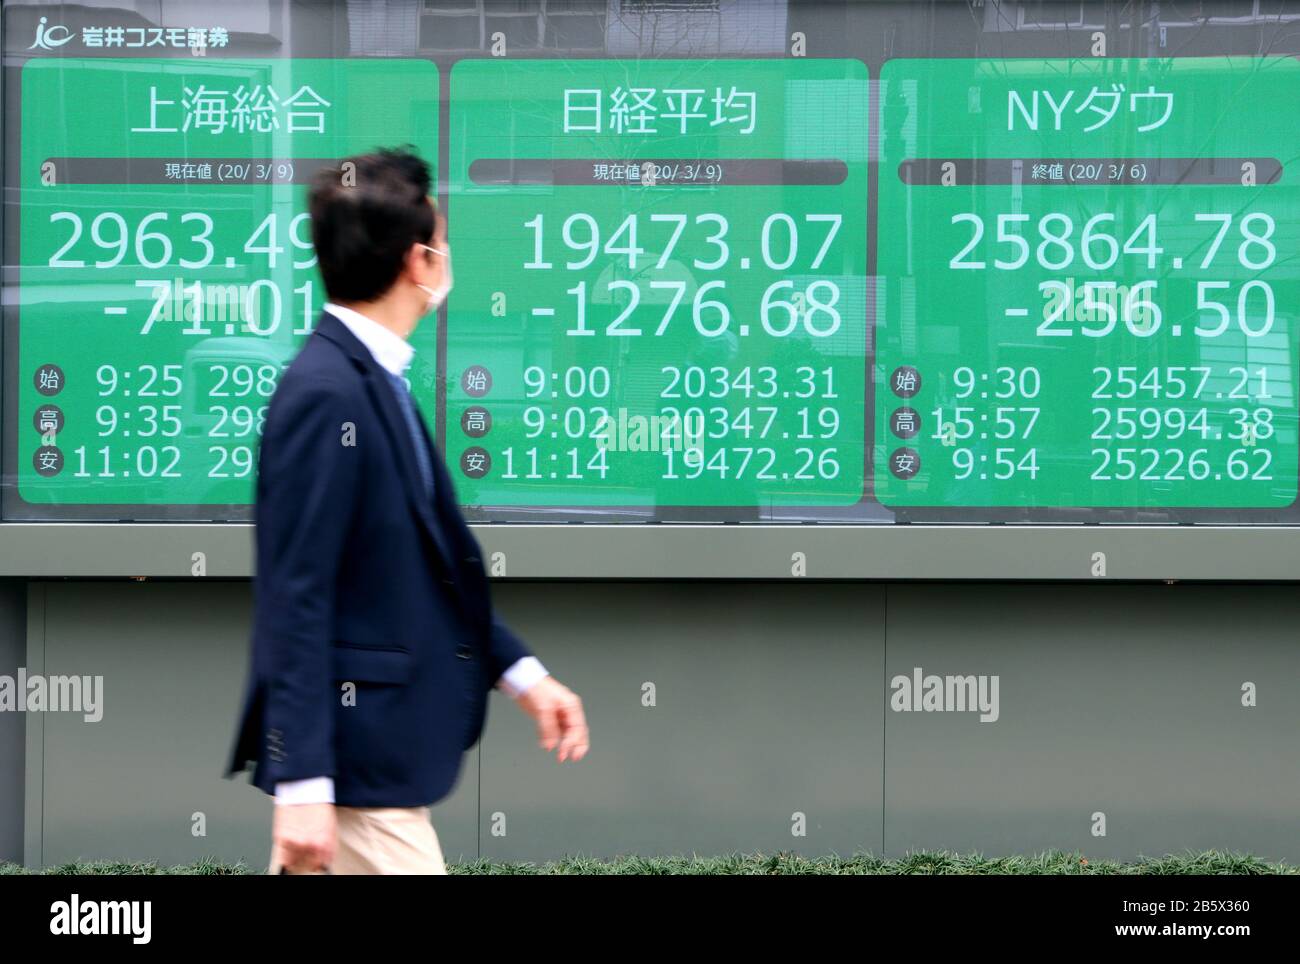 Tokyo, Japan. 9th Mar, 2020. A pedestrian passes before a share prices board in Tokyo on Monday, March 9, 2020. Japan's share prices fell 1,276.68 yen to close at 19,473.07 yen at the morning session of the Tokyo Stock Exchange for the fears of the global economic impact on the coronavirus outbreak. Credit: Yoshio Tsunoda/AFLO/Alamy Live News Stock Photo